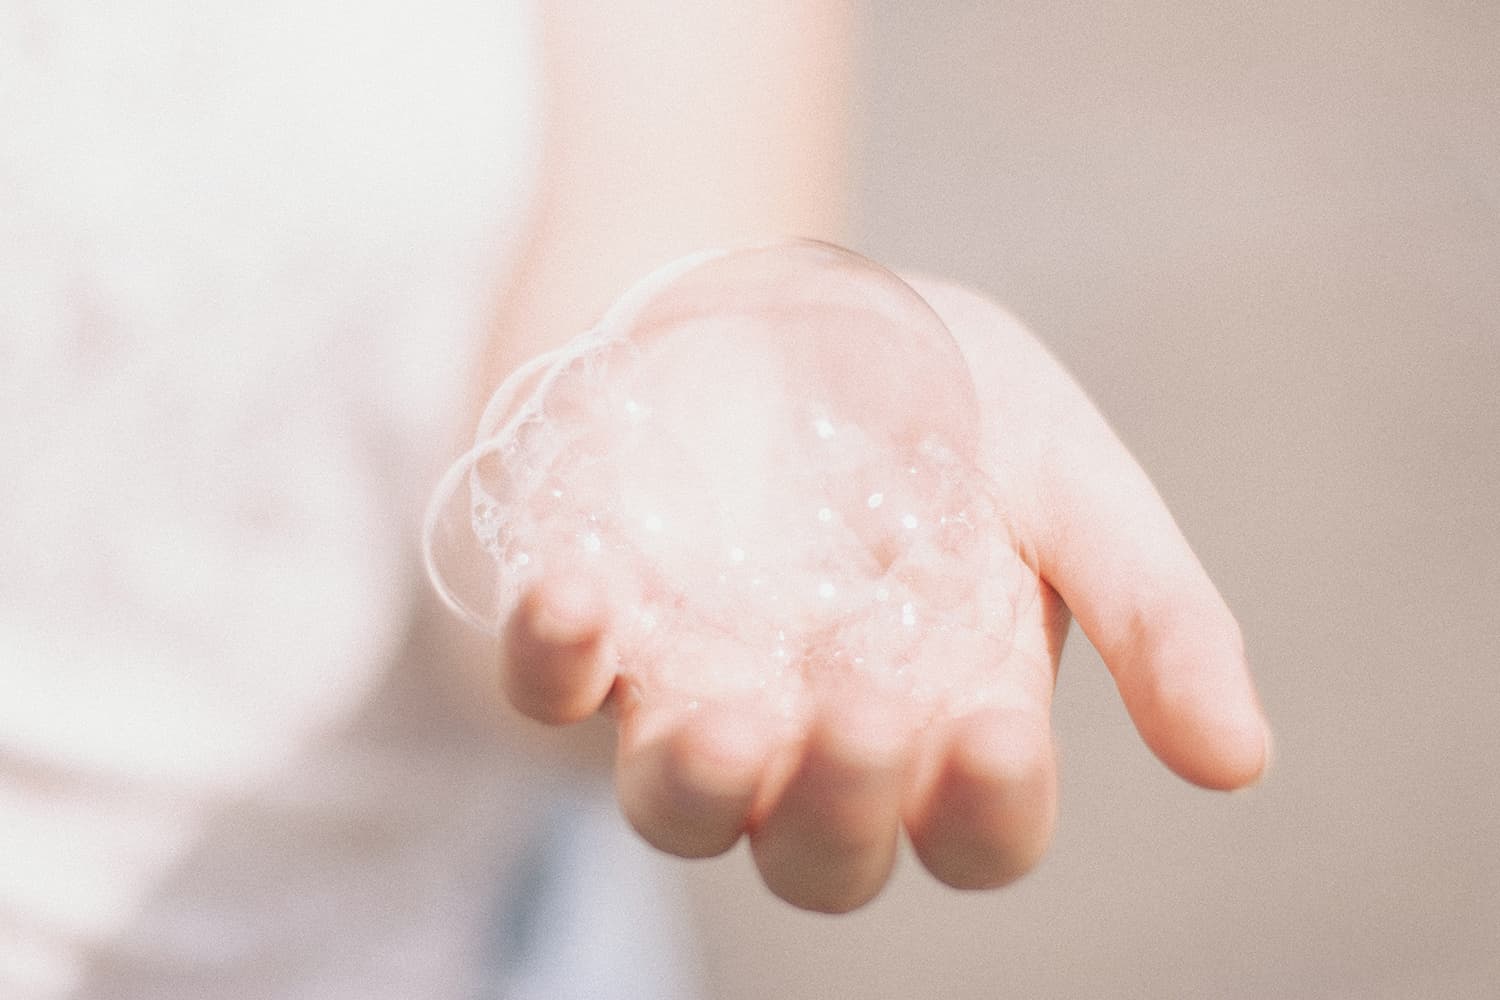 Hand with soap bubbles in it